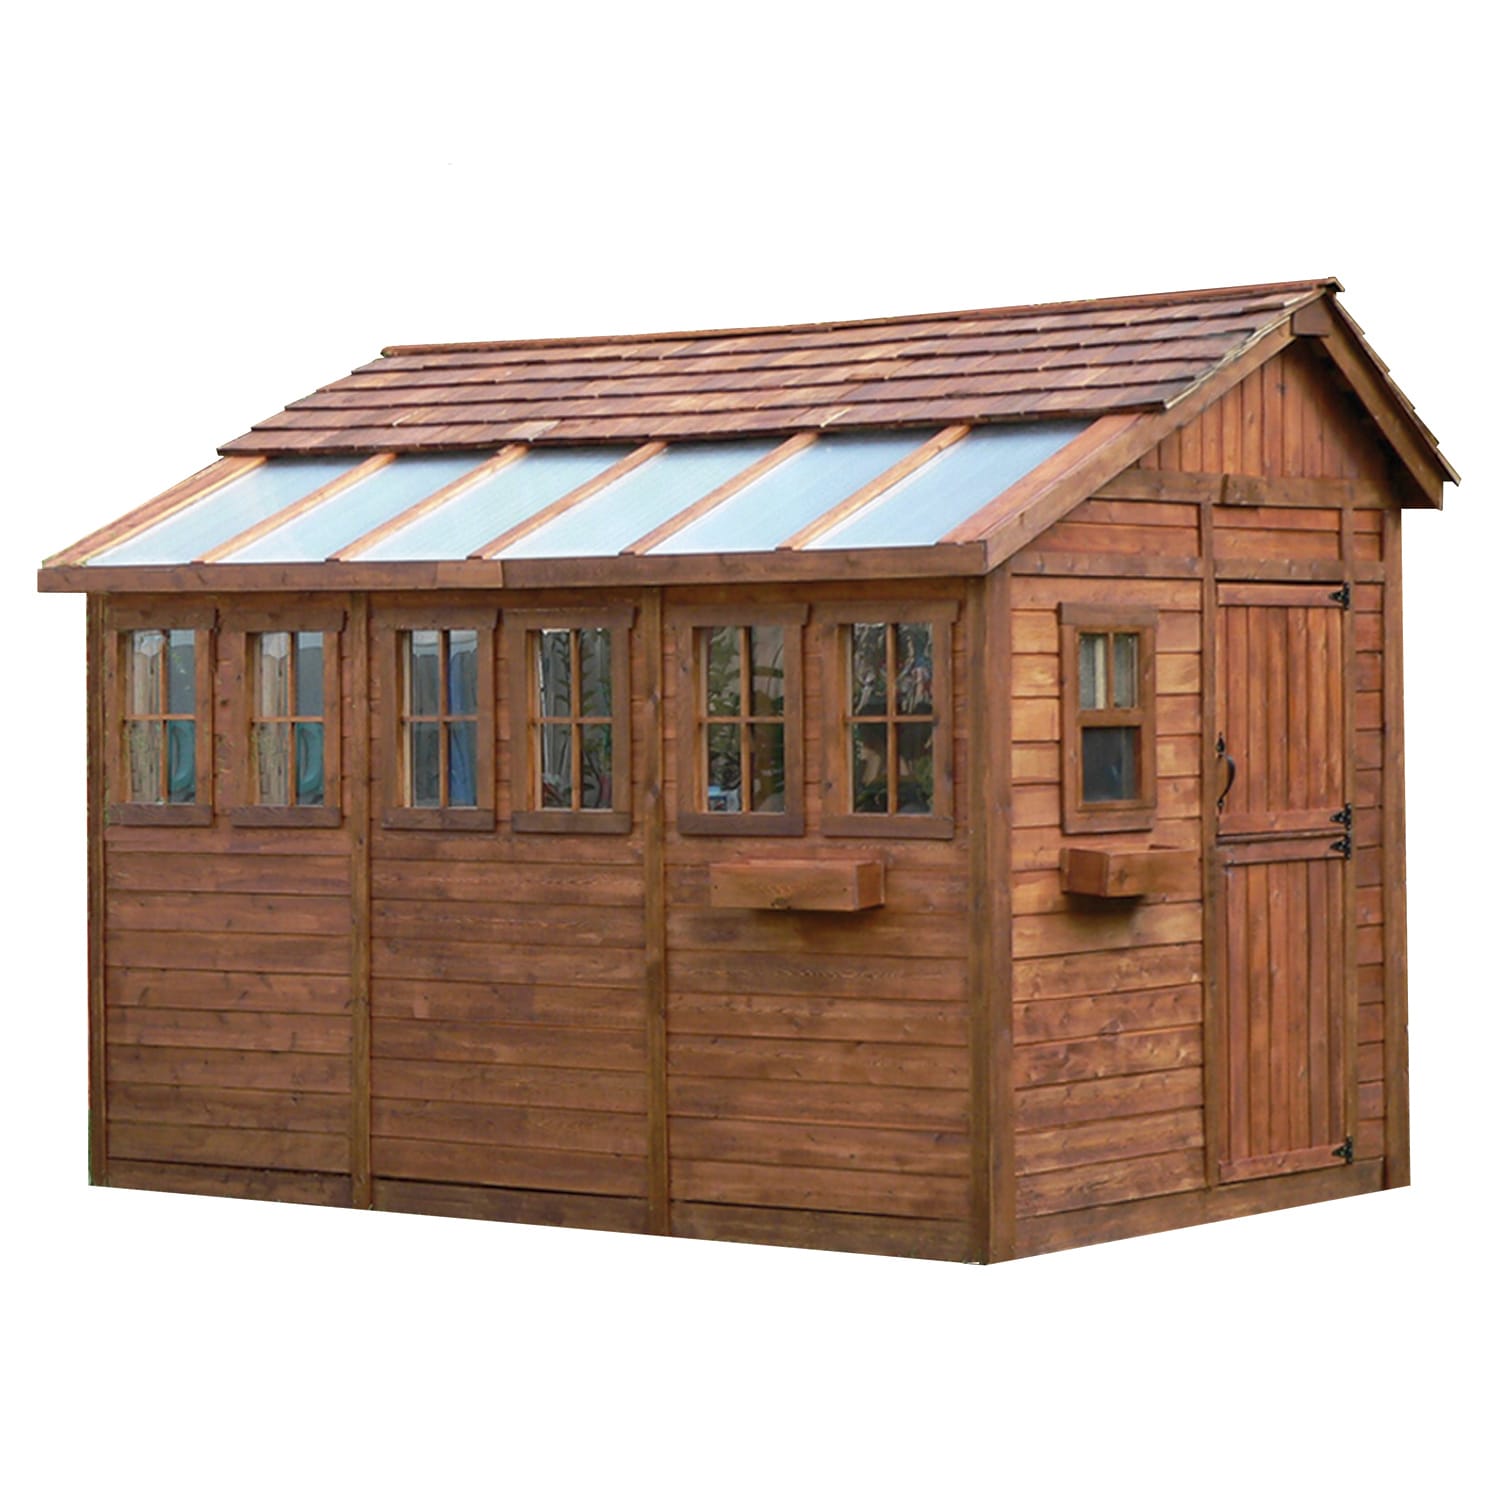  sheds for sale locally lowes